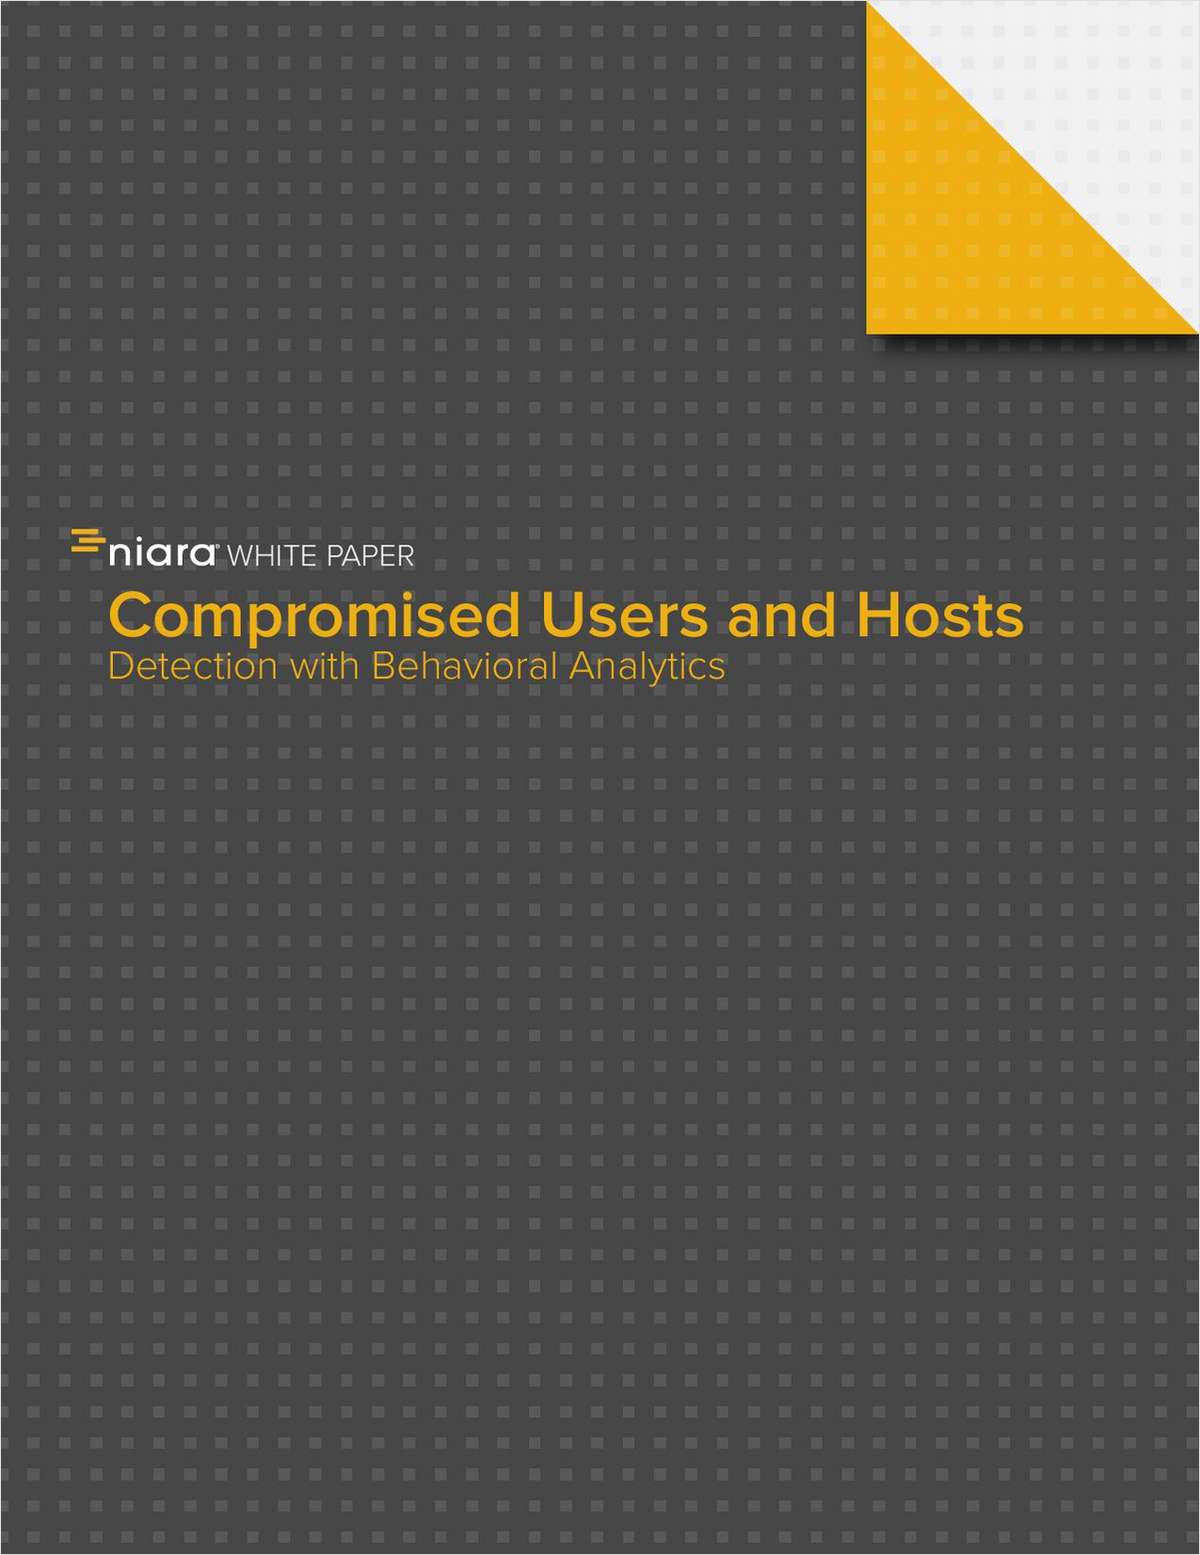 Compromised Users and Hosts - Detection with Behavioral Analytics